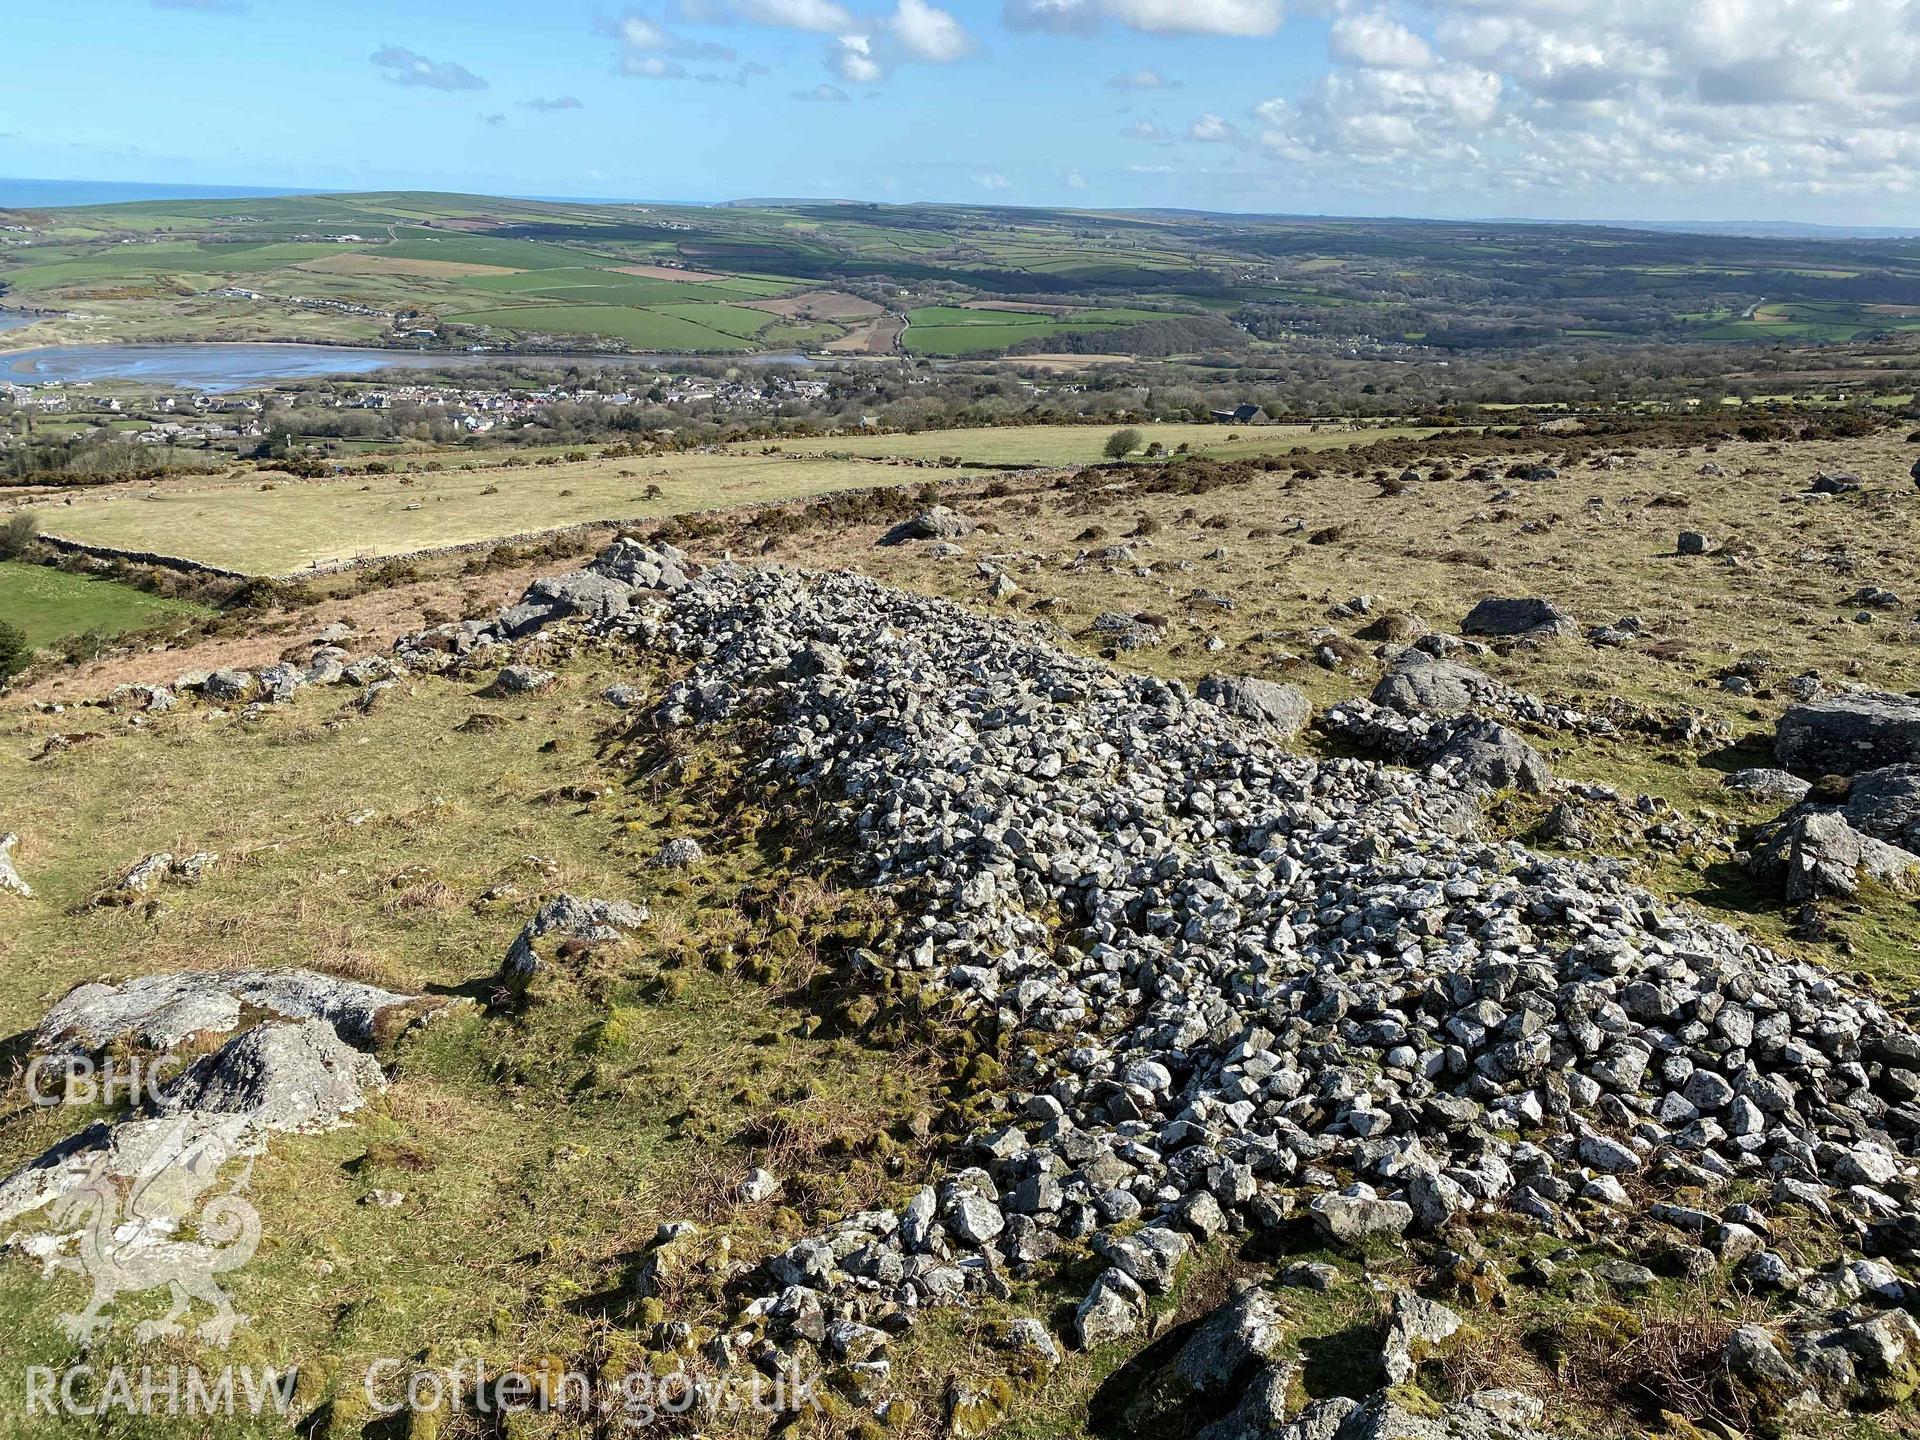 Digital photograph of Carn Ffoi defended enclosure and surrounding landscape, produced by Paul Davis in 2020